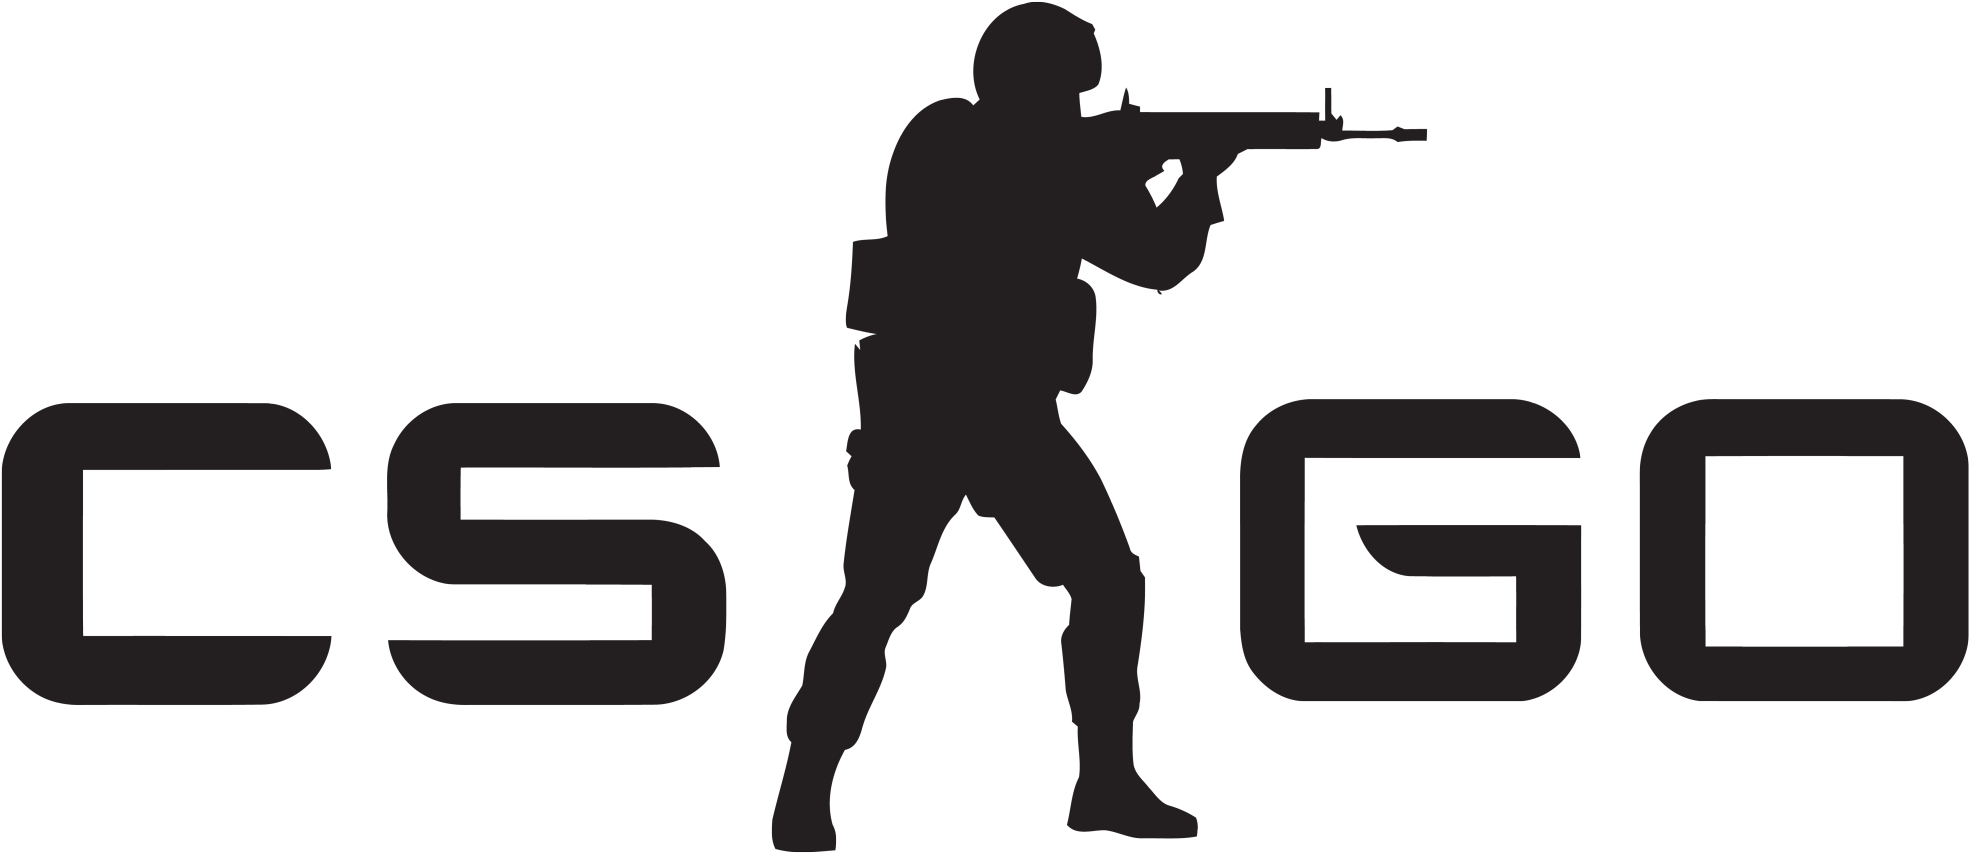 Global Offensive Stencil Art Font Cs Go - Counter-strike: Global Offensive (2057x2856), Png Download